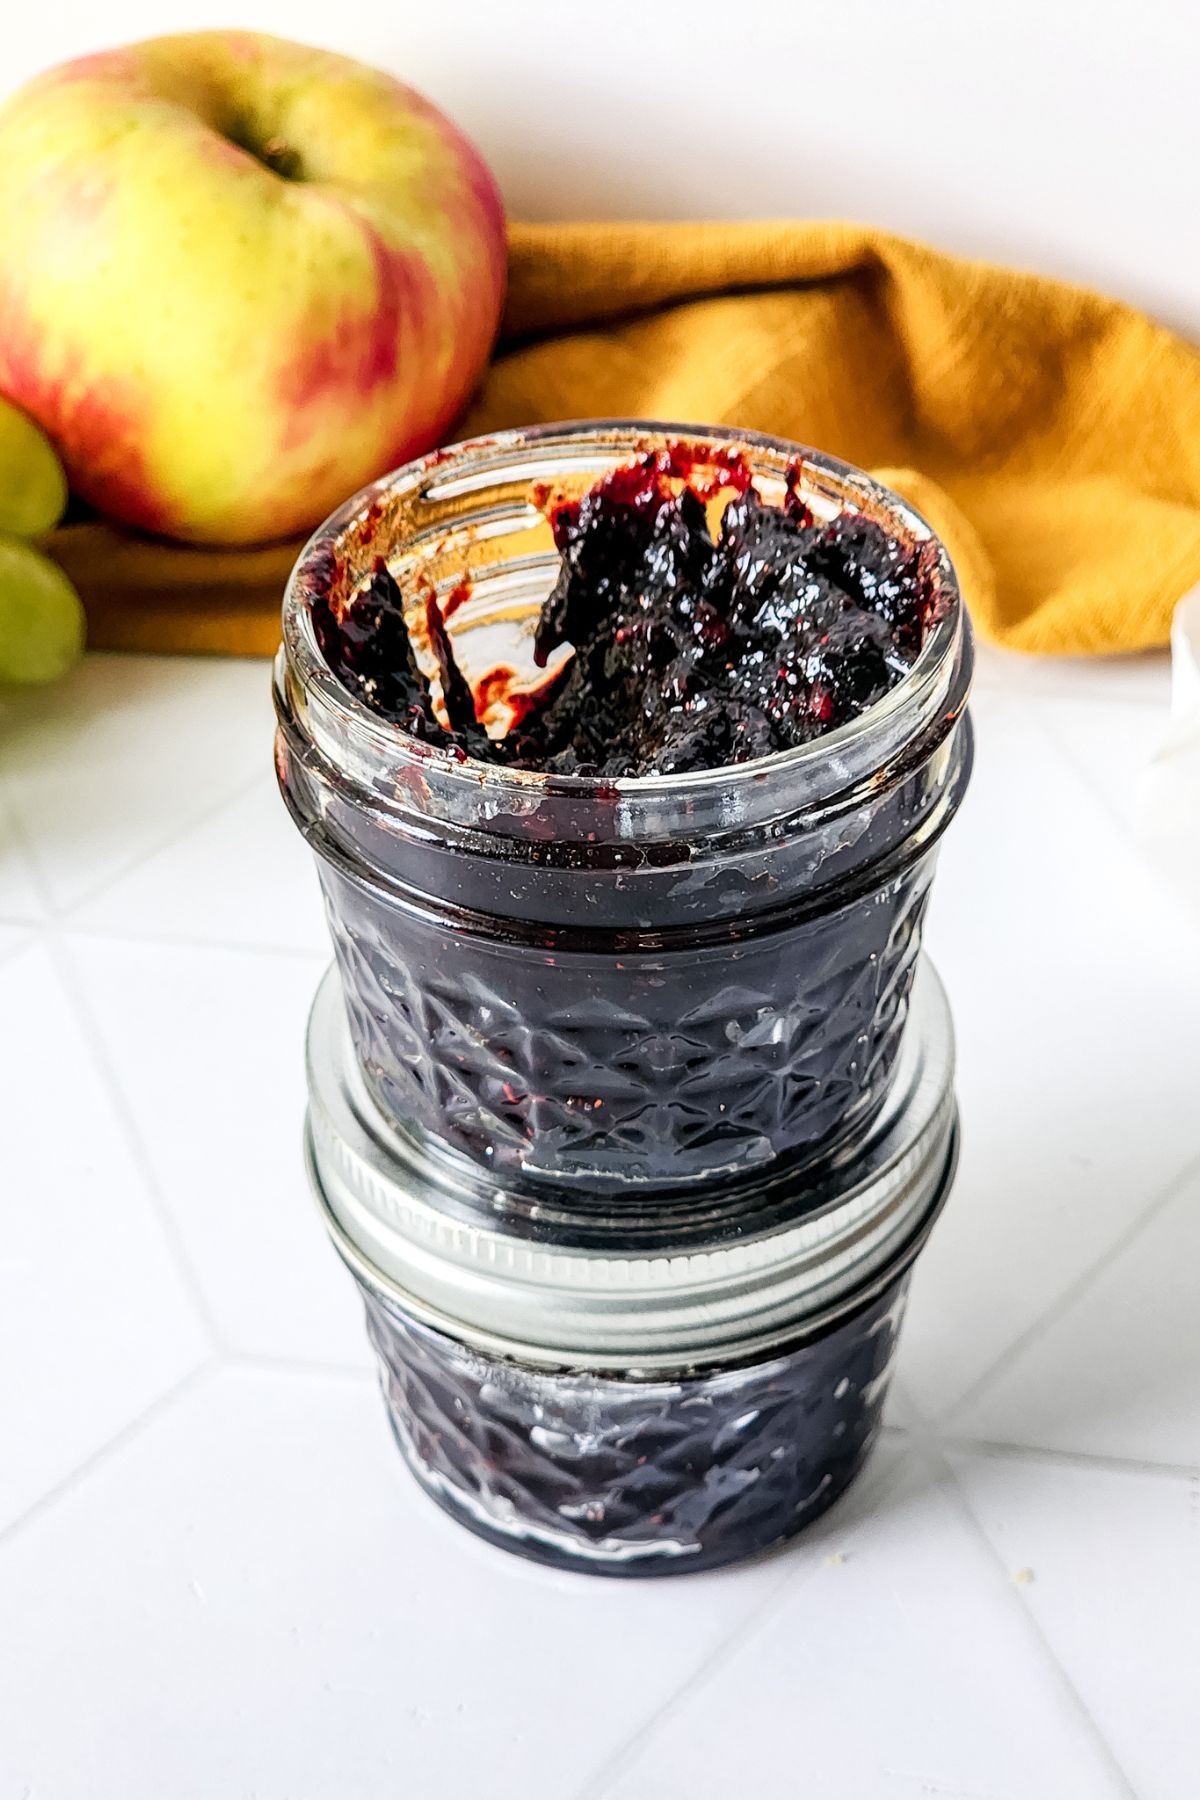 An open jar of Mixed Berry jam sitting on a closed one.